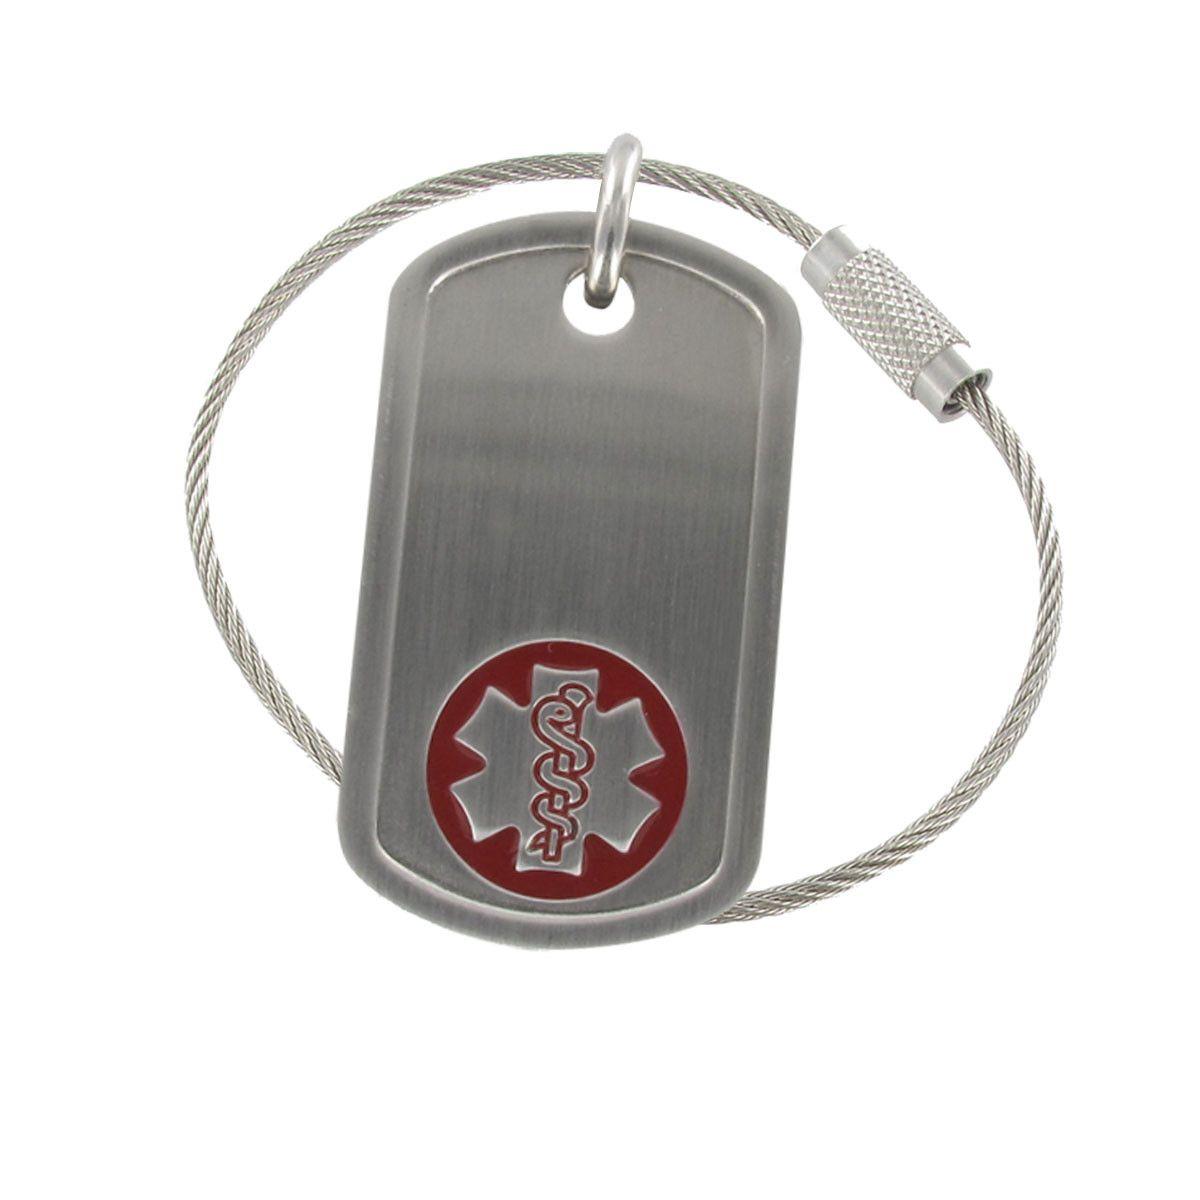 Steel Red Dog Logo - Stainless Steel Dog Tag Red Key Chain. American Medical ID